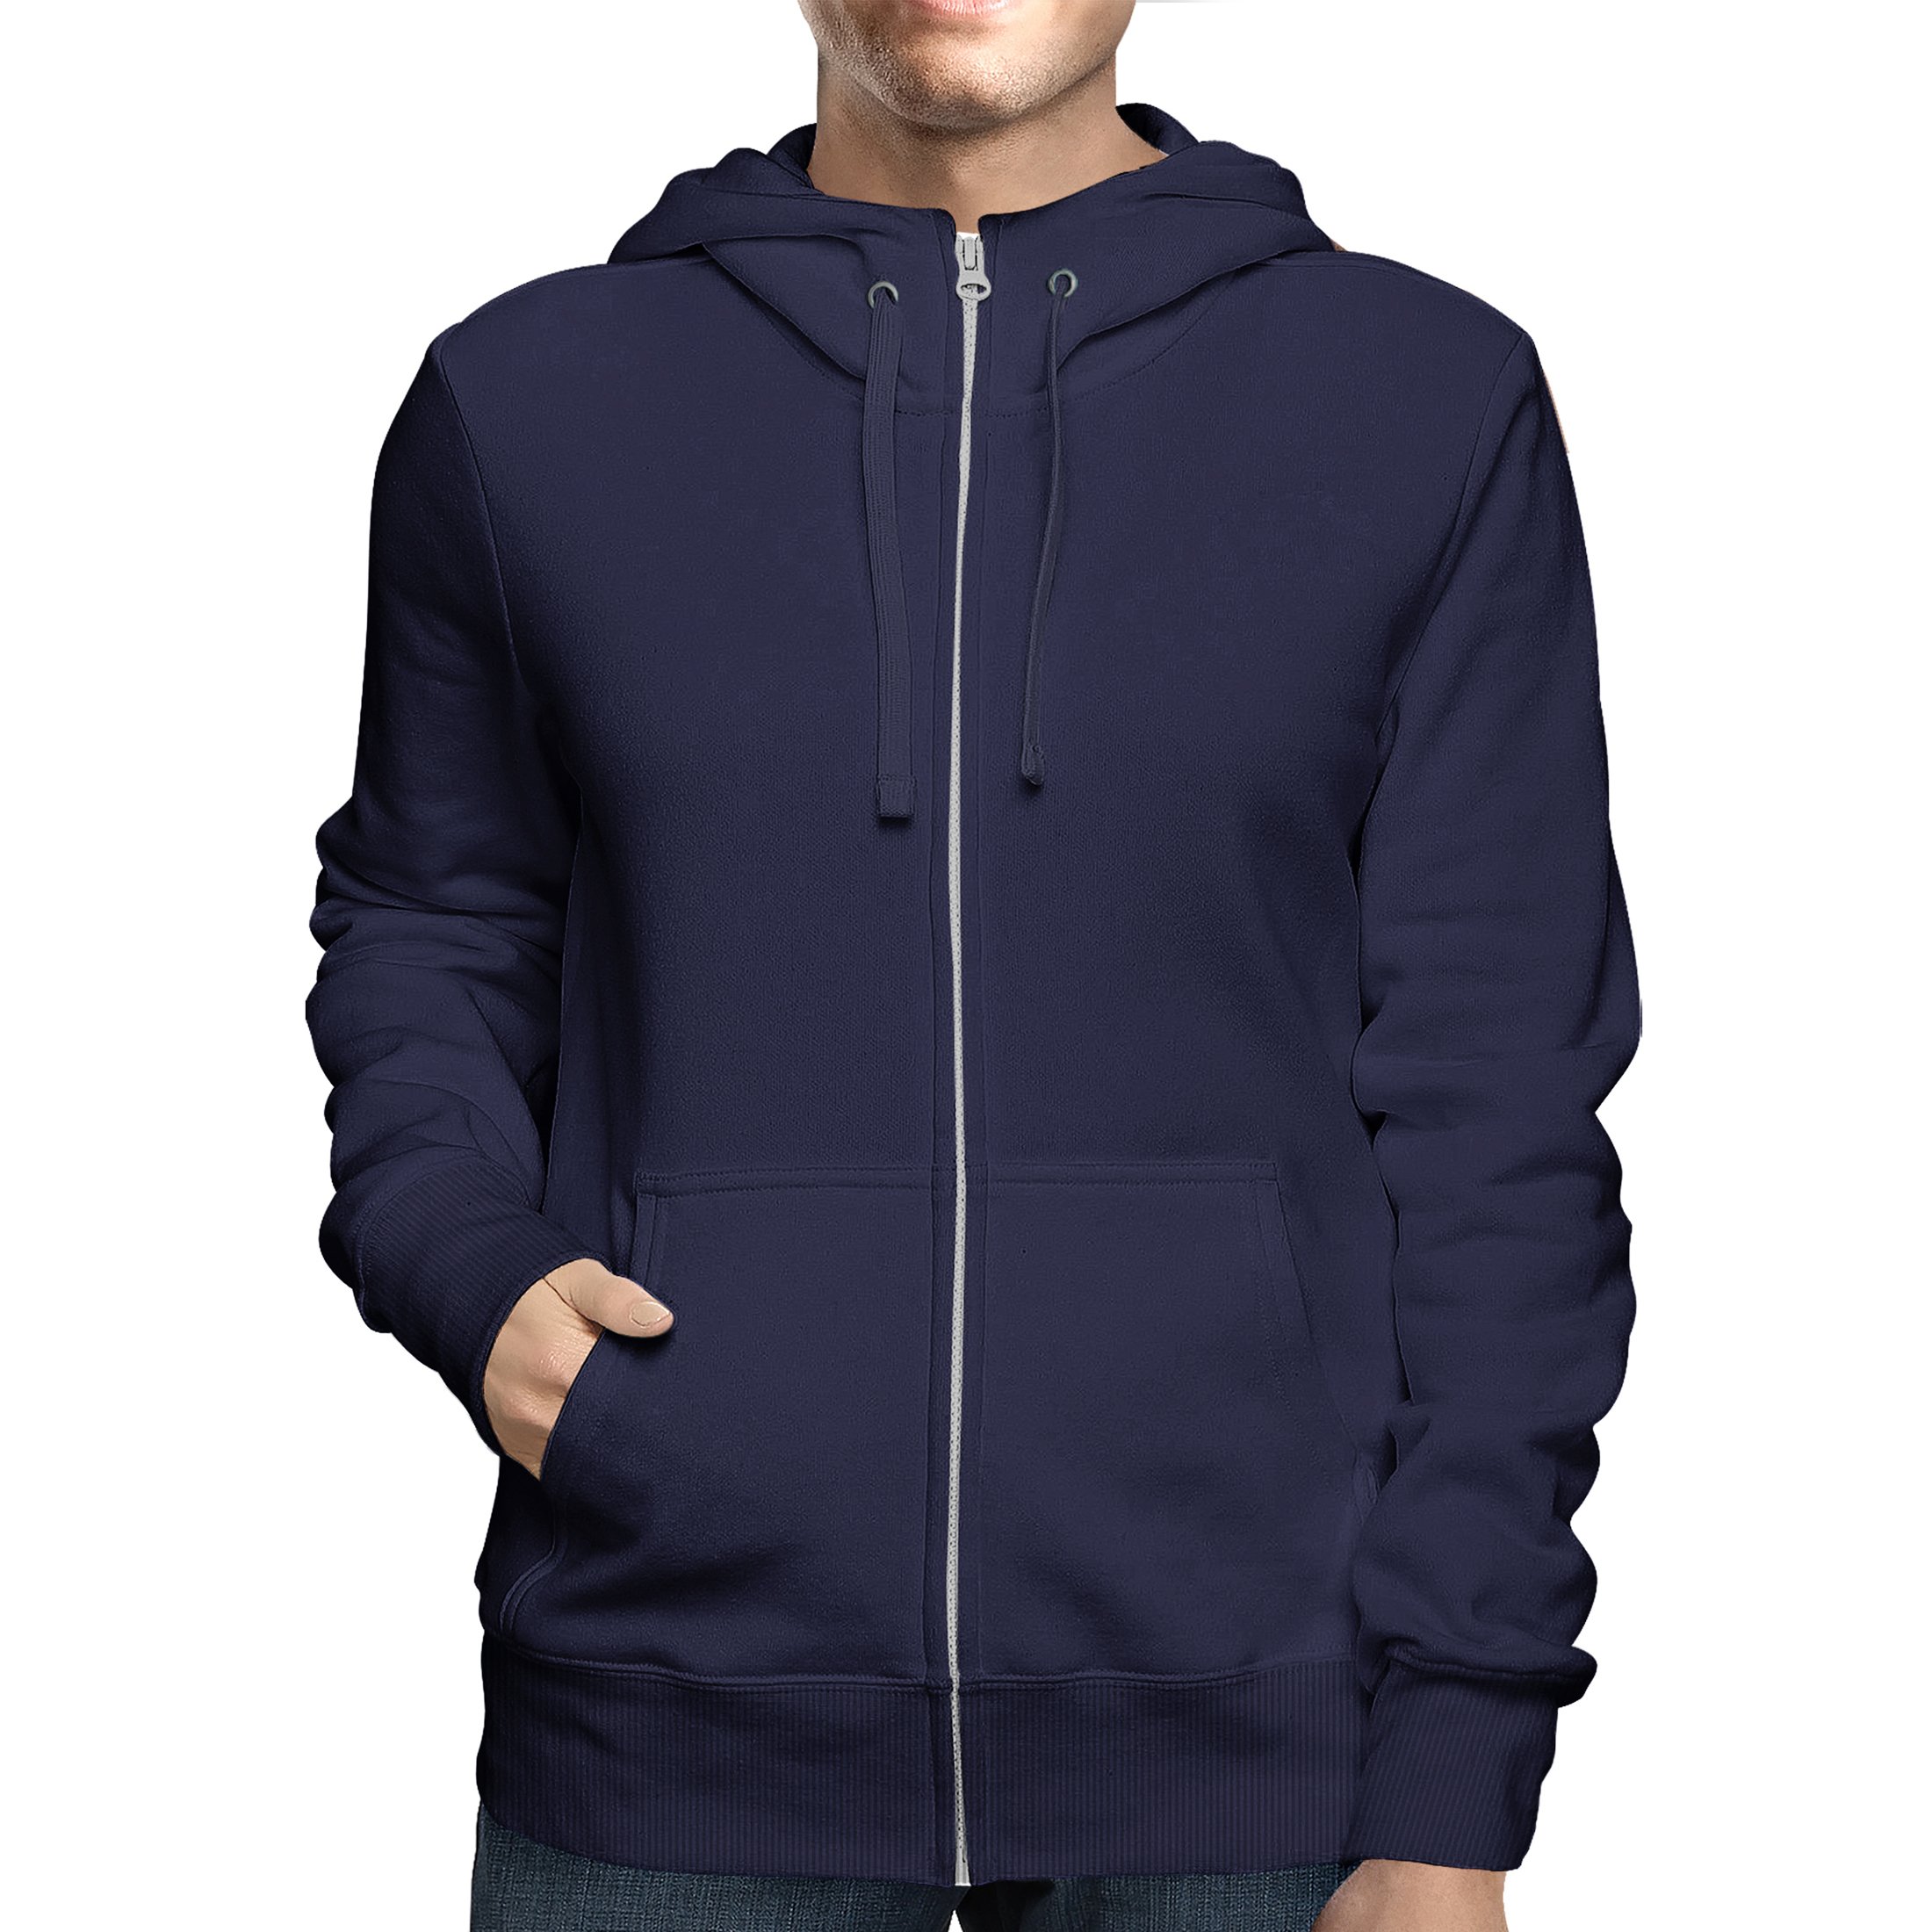 2-Pack: Men's Full Zip Up Fleece-Lined Hoodie Sweatshirt (Big & Tall Size Available) - Navy, Small